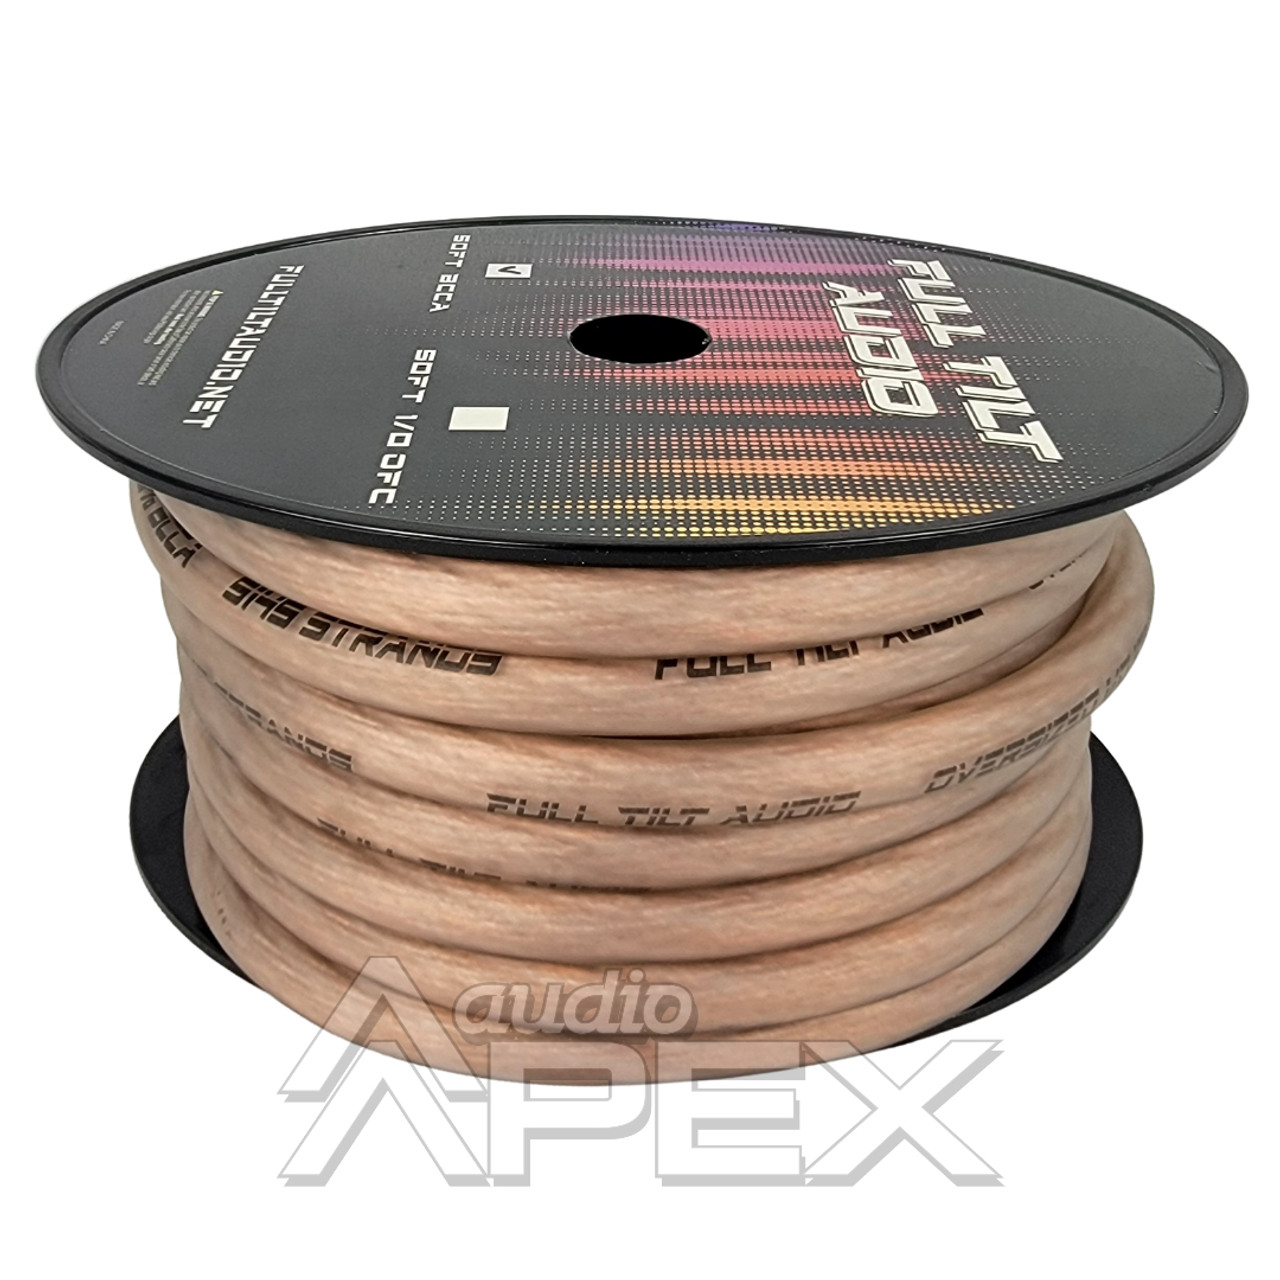 Full Tilt Audio White 8 Gauge 50 Foot Tinned OFC Oxygen Free Copper  Power/Ground Cable/